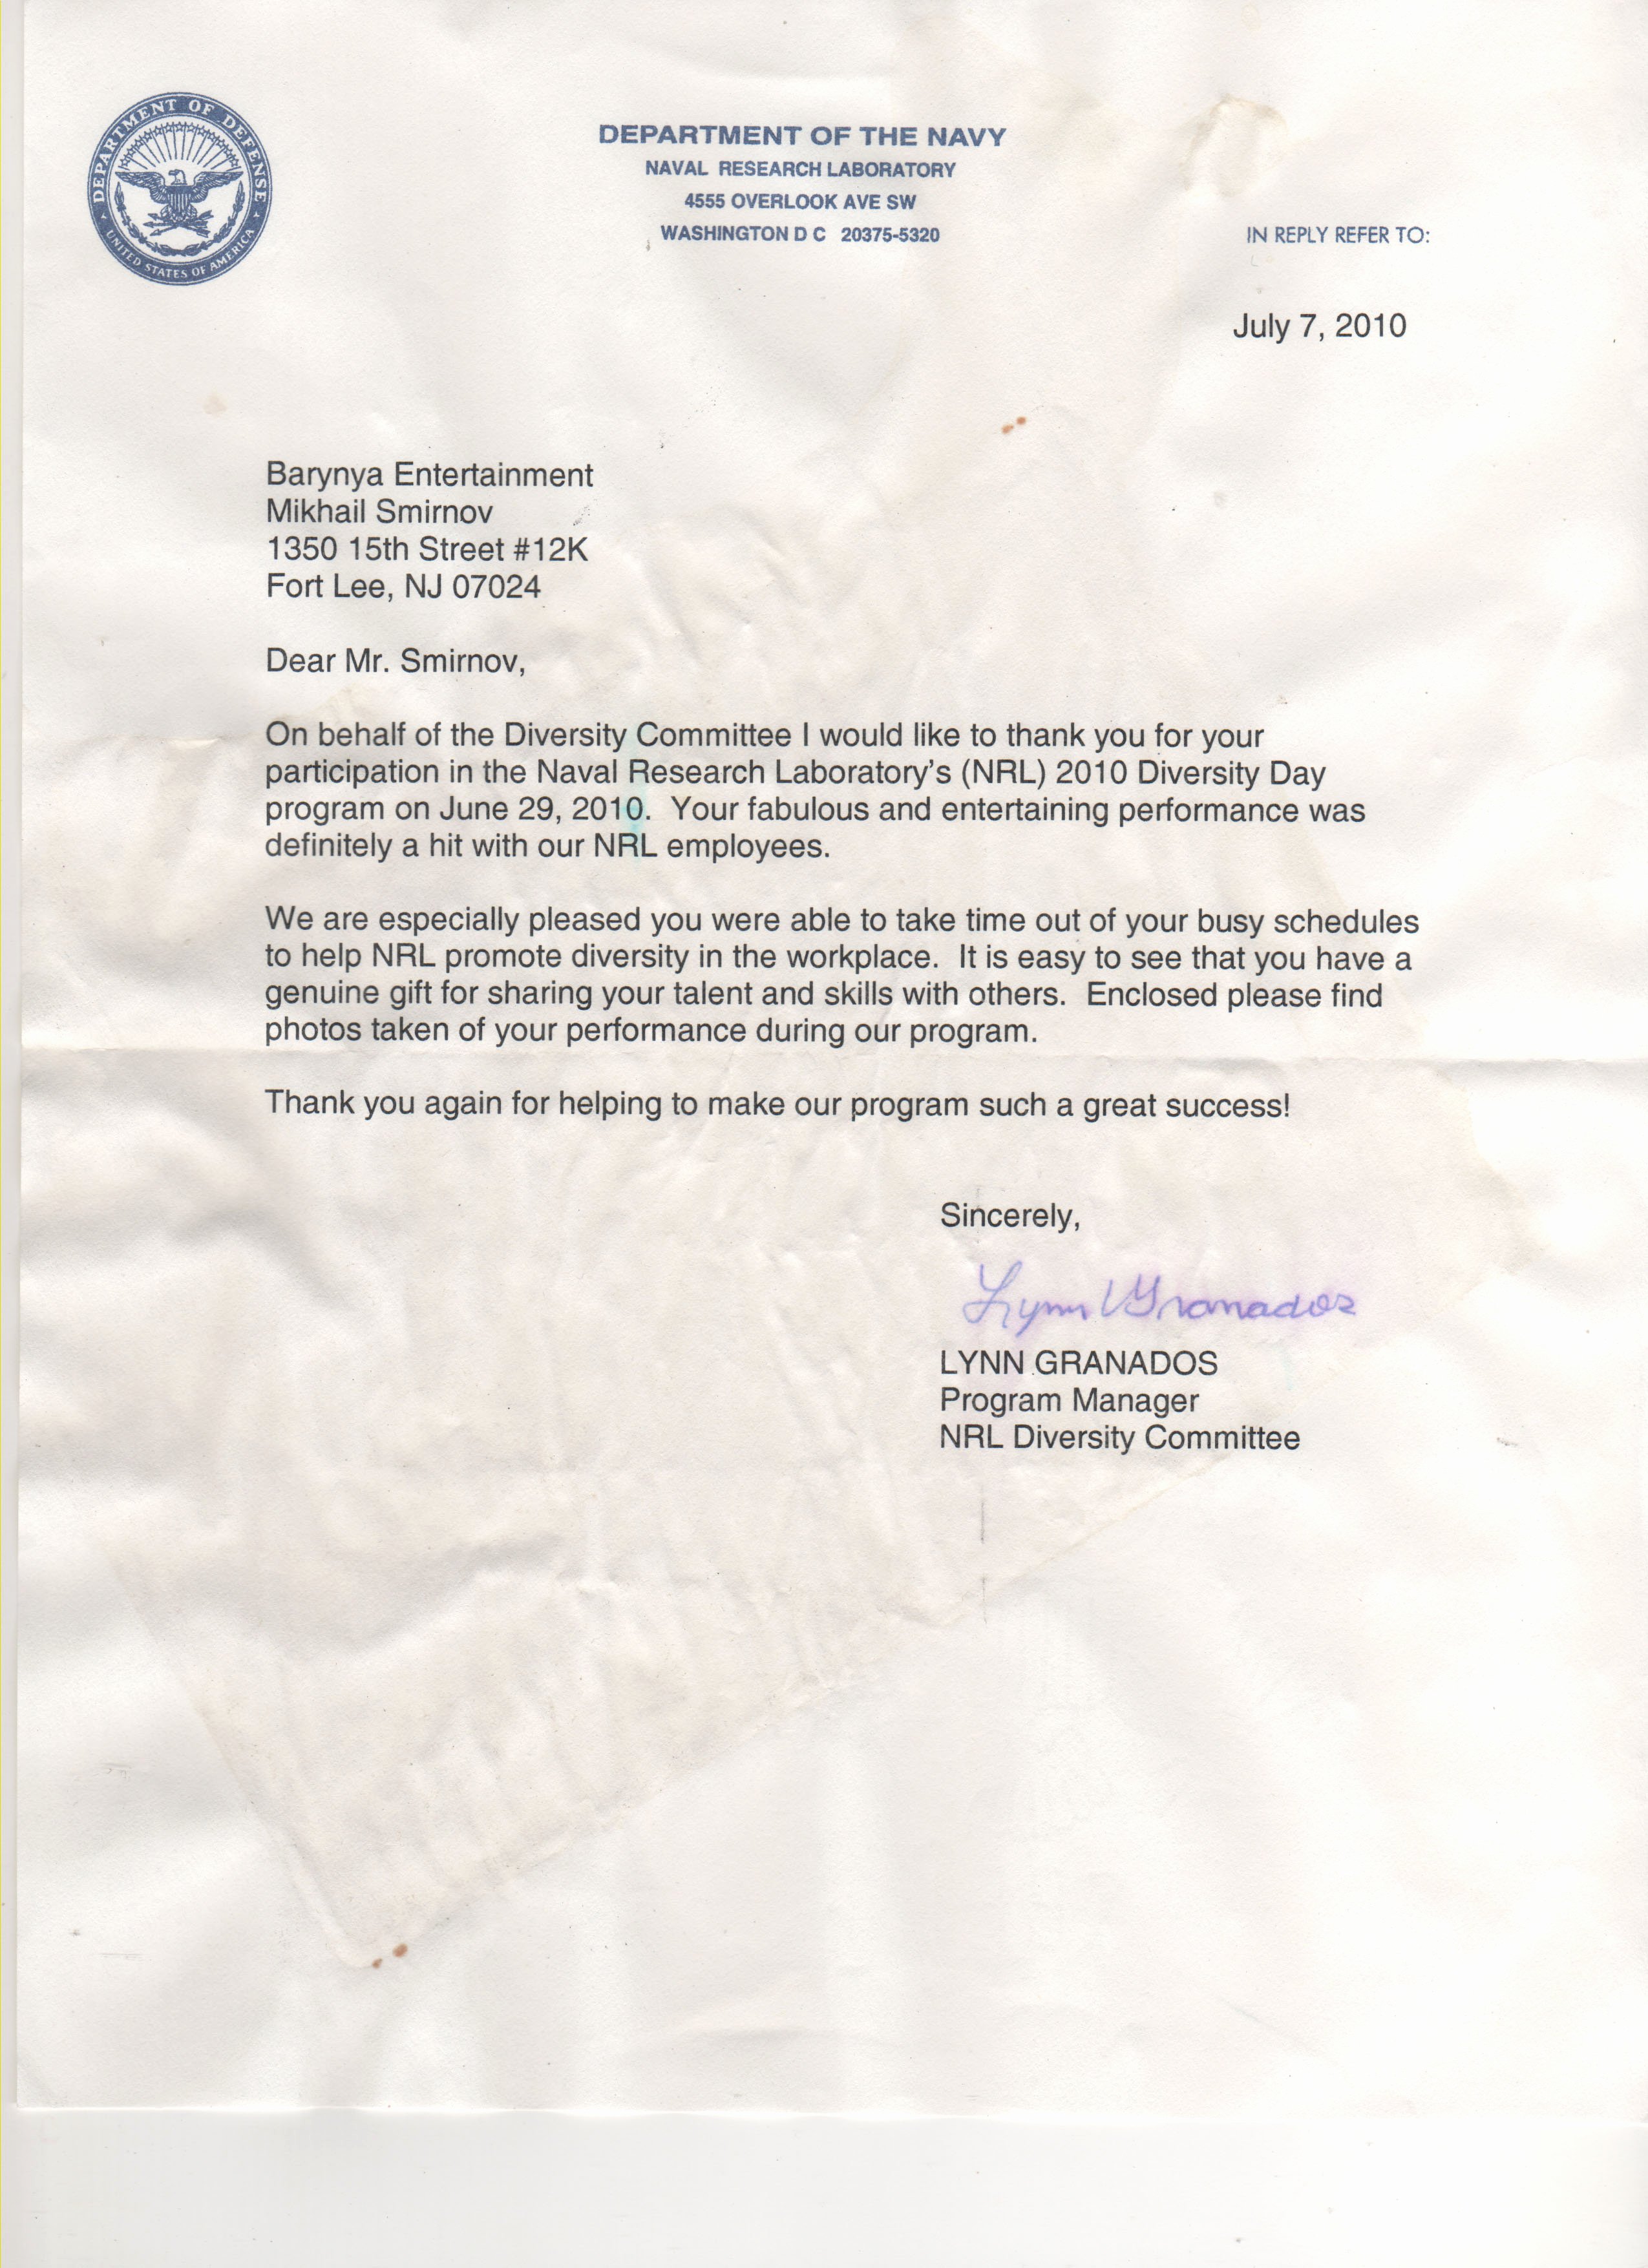 Air force Academy Recommendation Letter Fresh Letter Of Re Mendation for Naval Academy Example Hospi